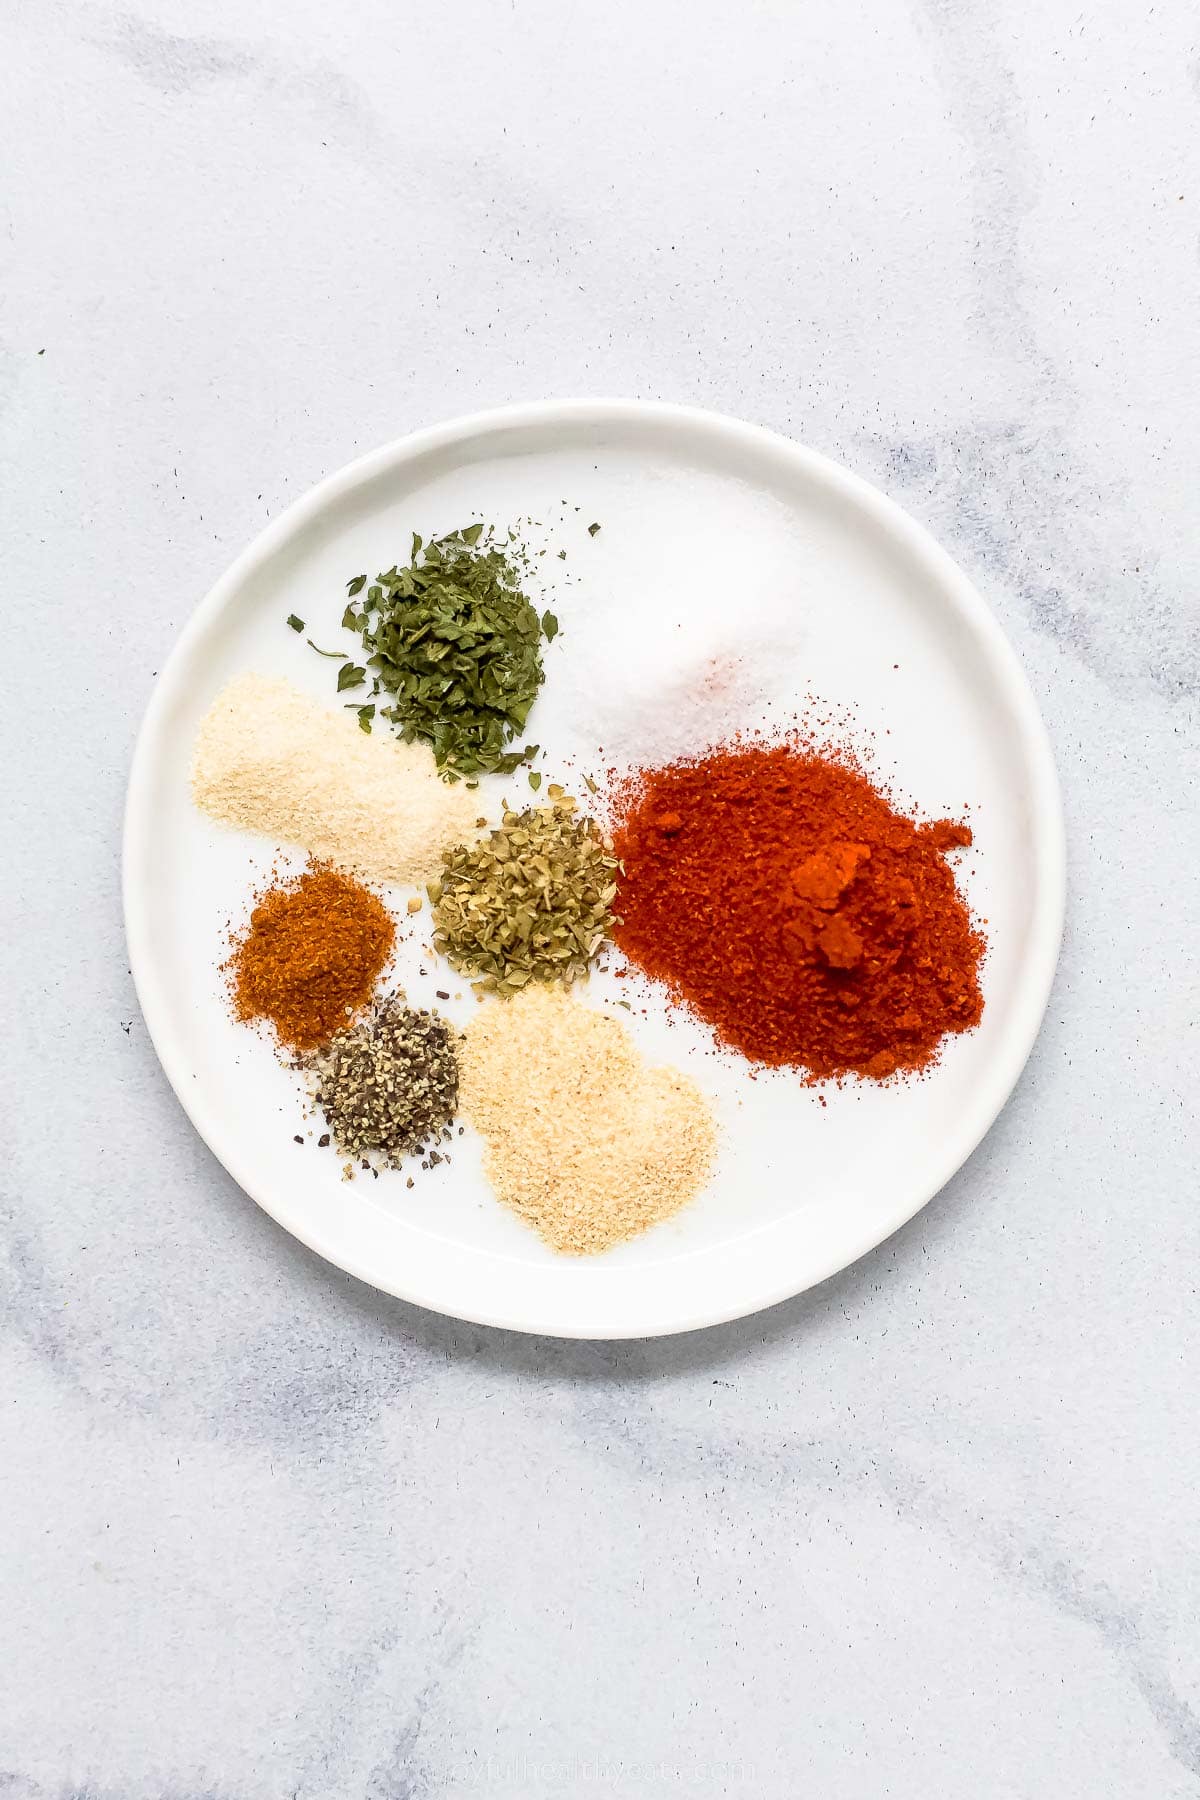 Spices for the blackened seasoning on a plate.